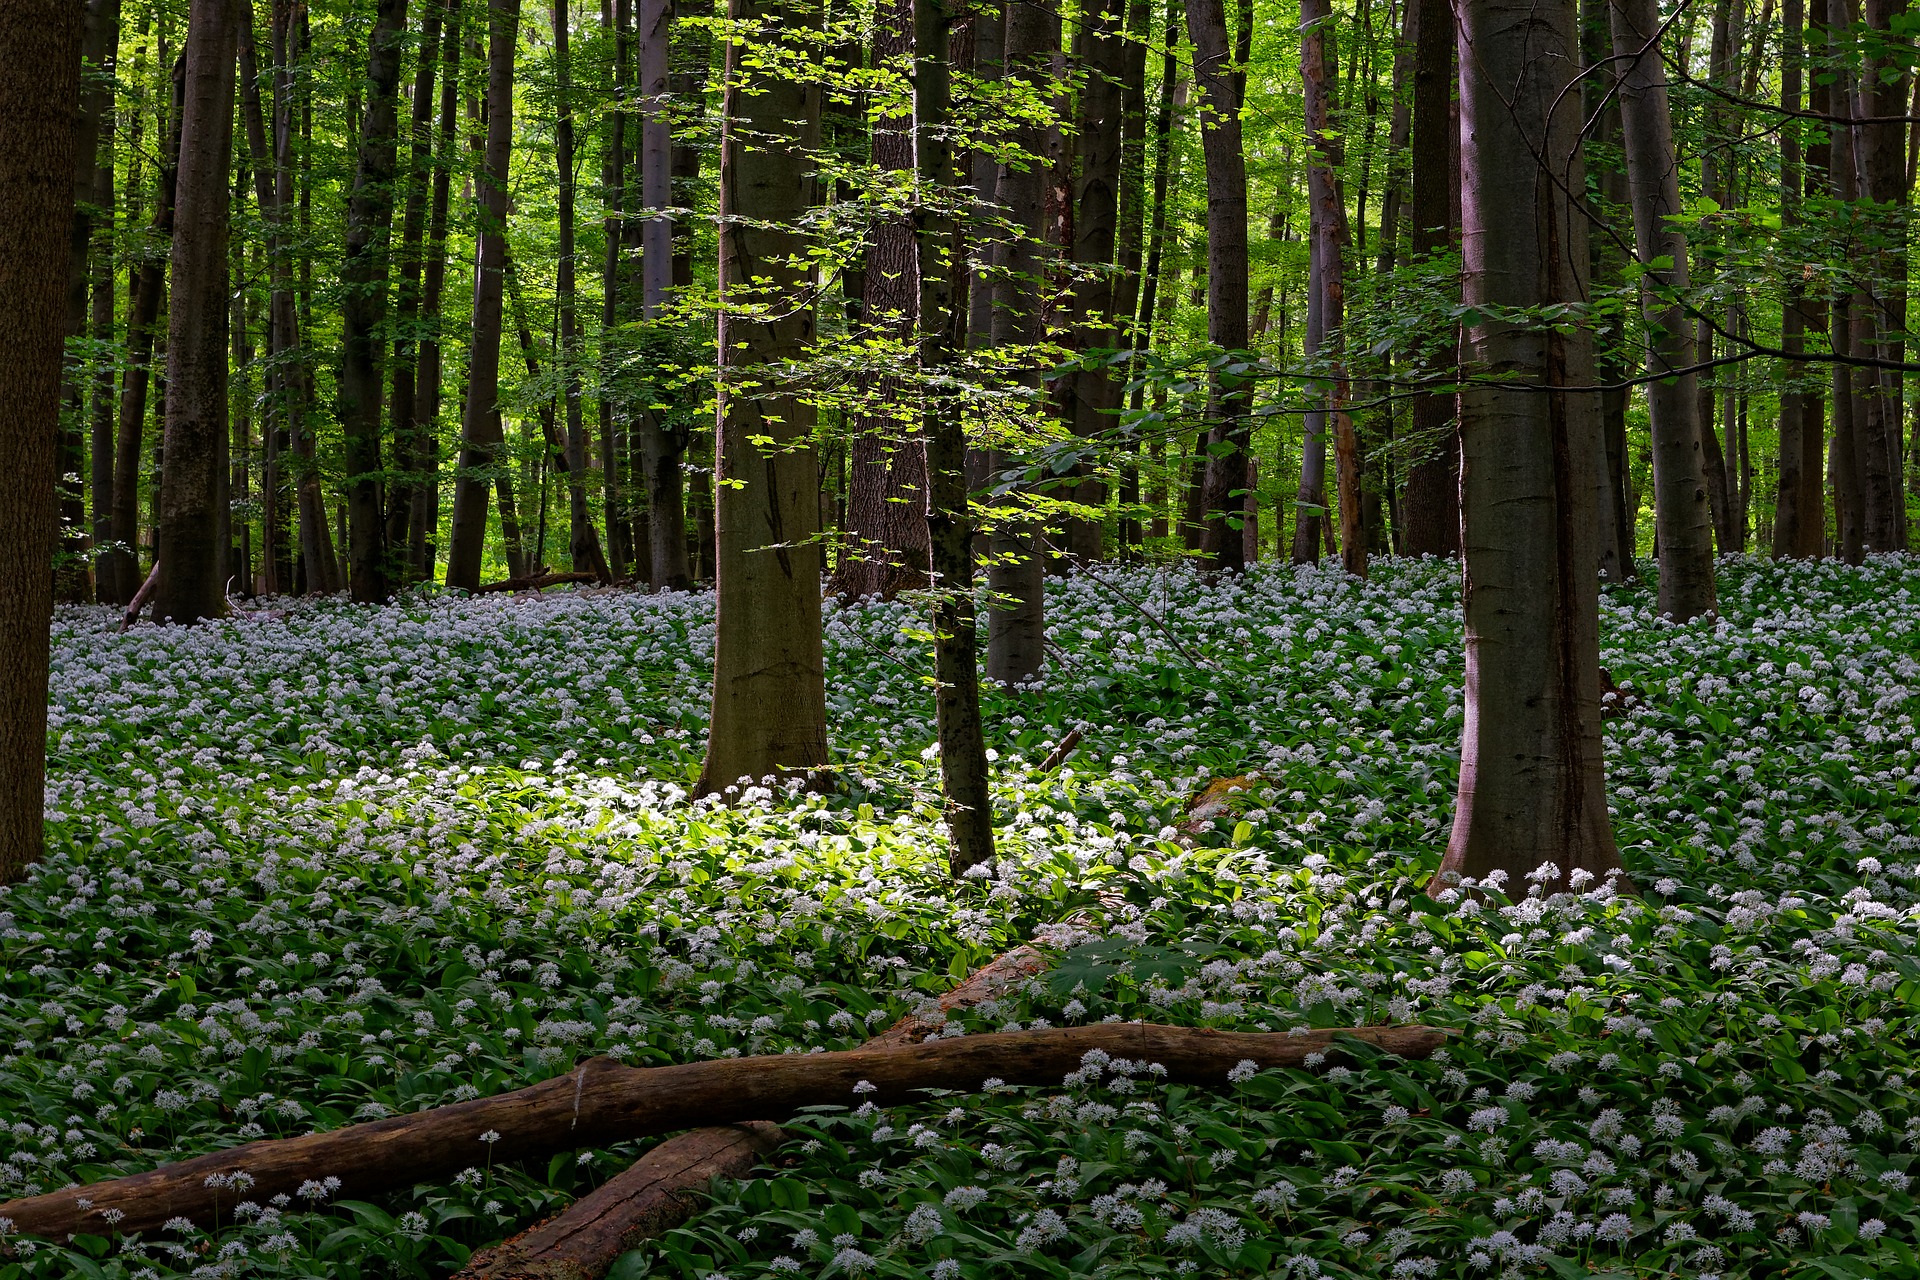 A forrest with wildflowers growing on the ground